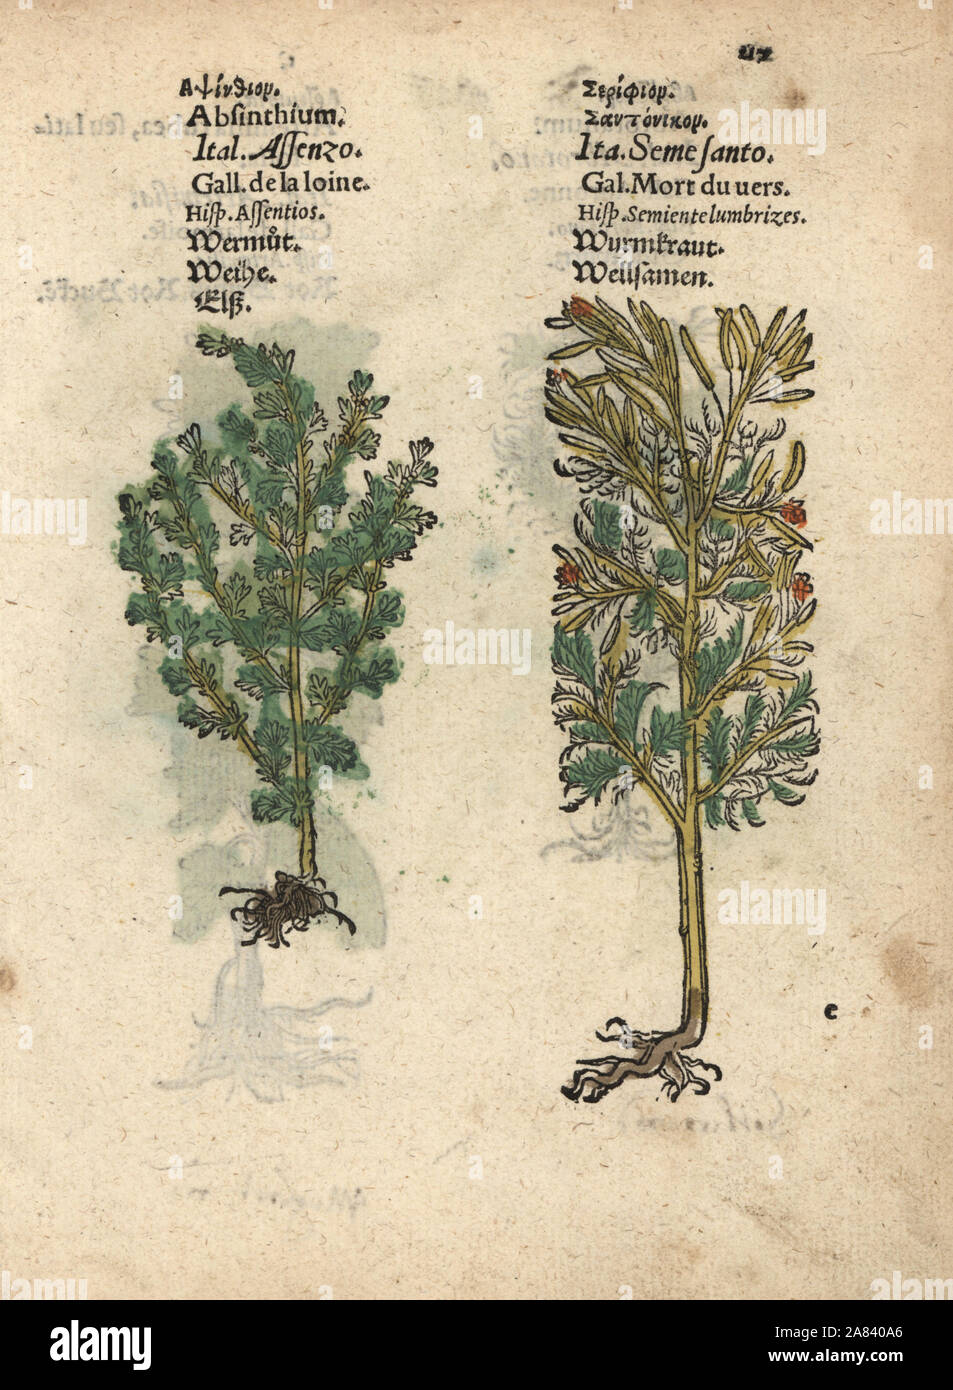 Wormwood or absinthe, Artemisia absinthium, and santonica or Levant wormseed, Artemisia cina. Handcoloured woodblock engraving of a botanical illustration from Adam Lonicer's Krauterbuch, or Herbal, Frankfurt, 1557. This from a 17th century pirate edition or atlas of illustrations only, with captions in Latin, Greek, French, Italian, German, and in English manuscript. Stock Photo